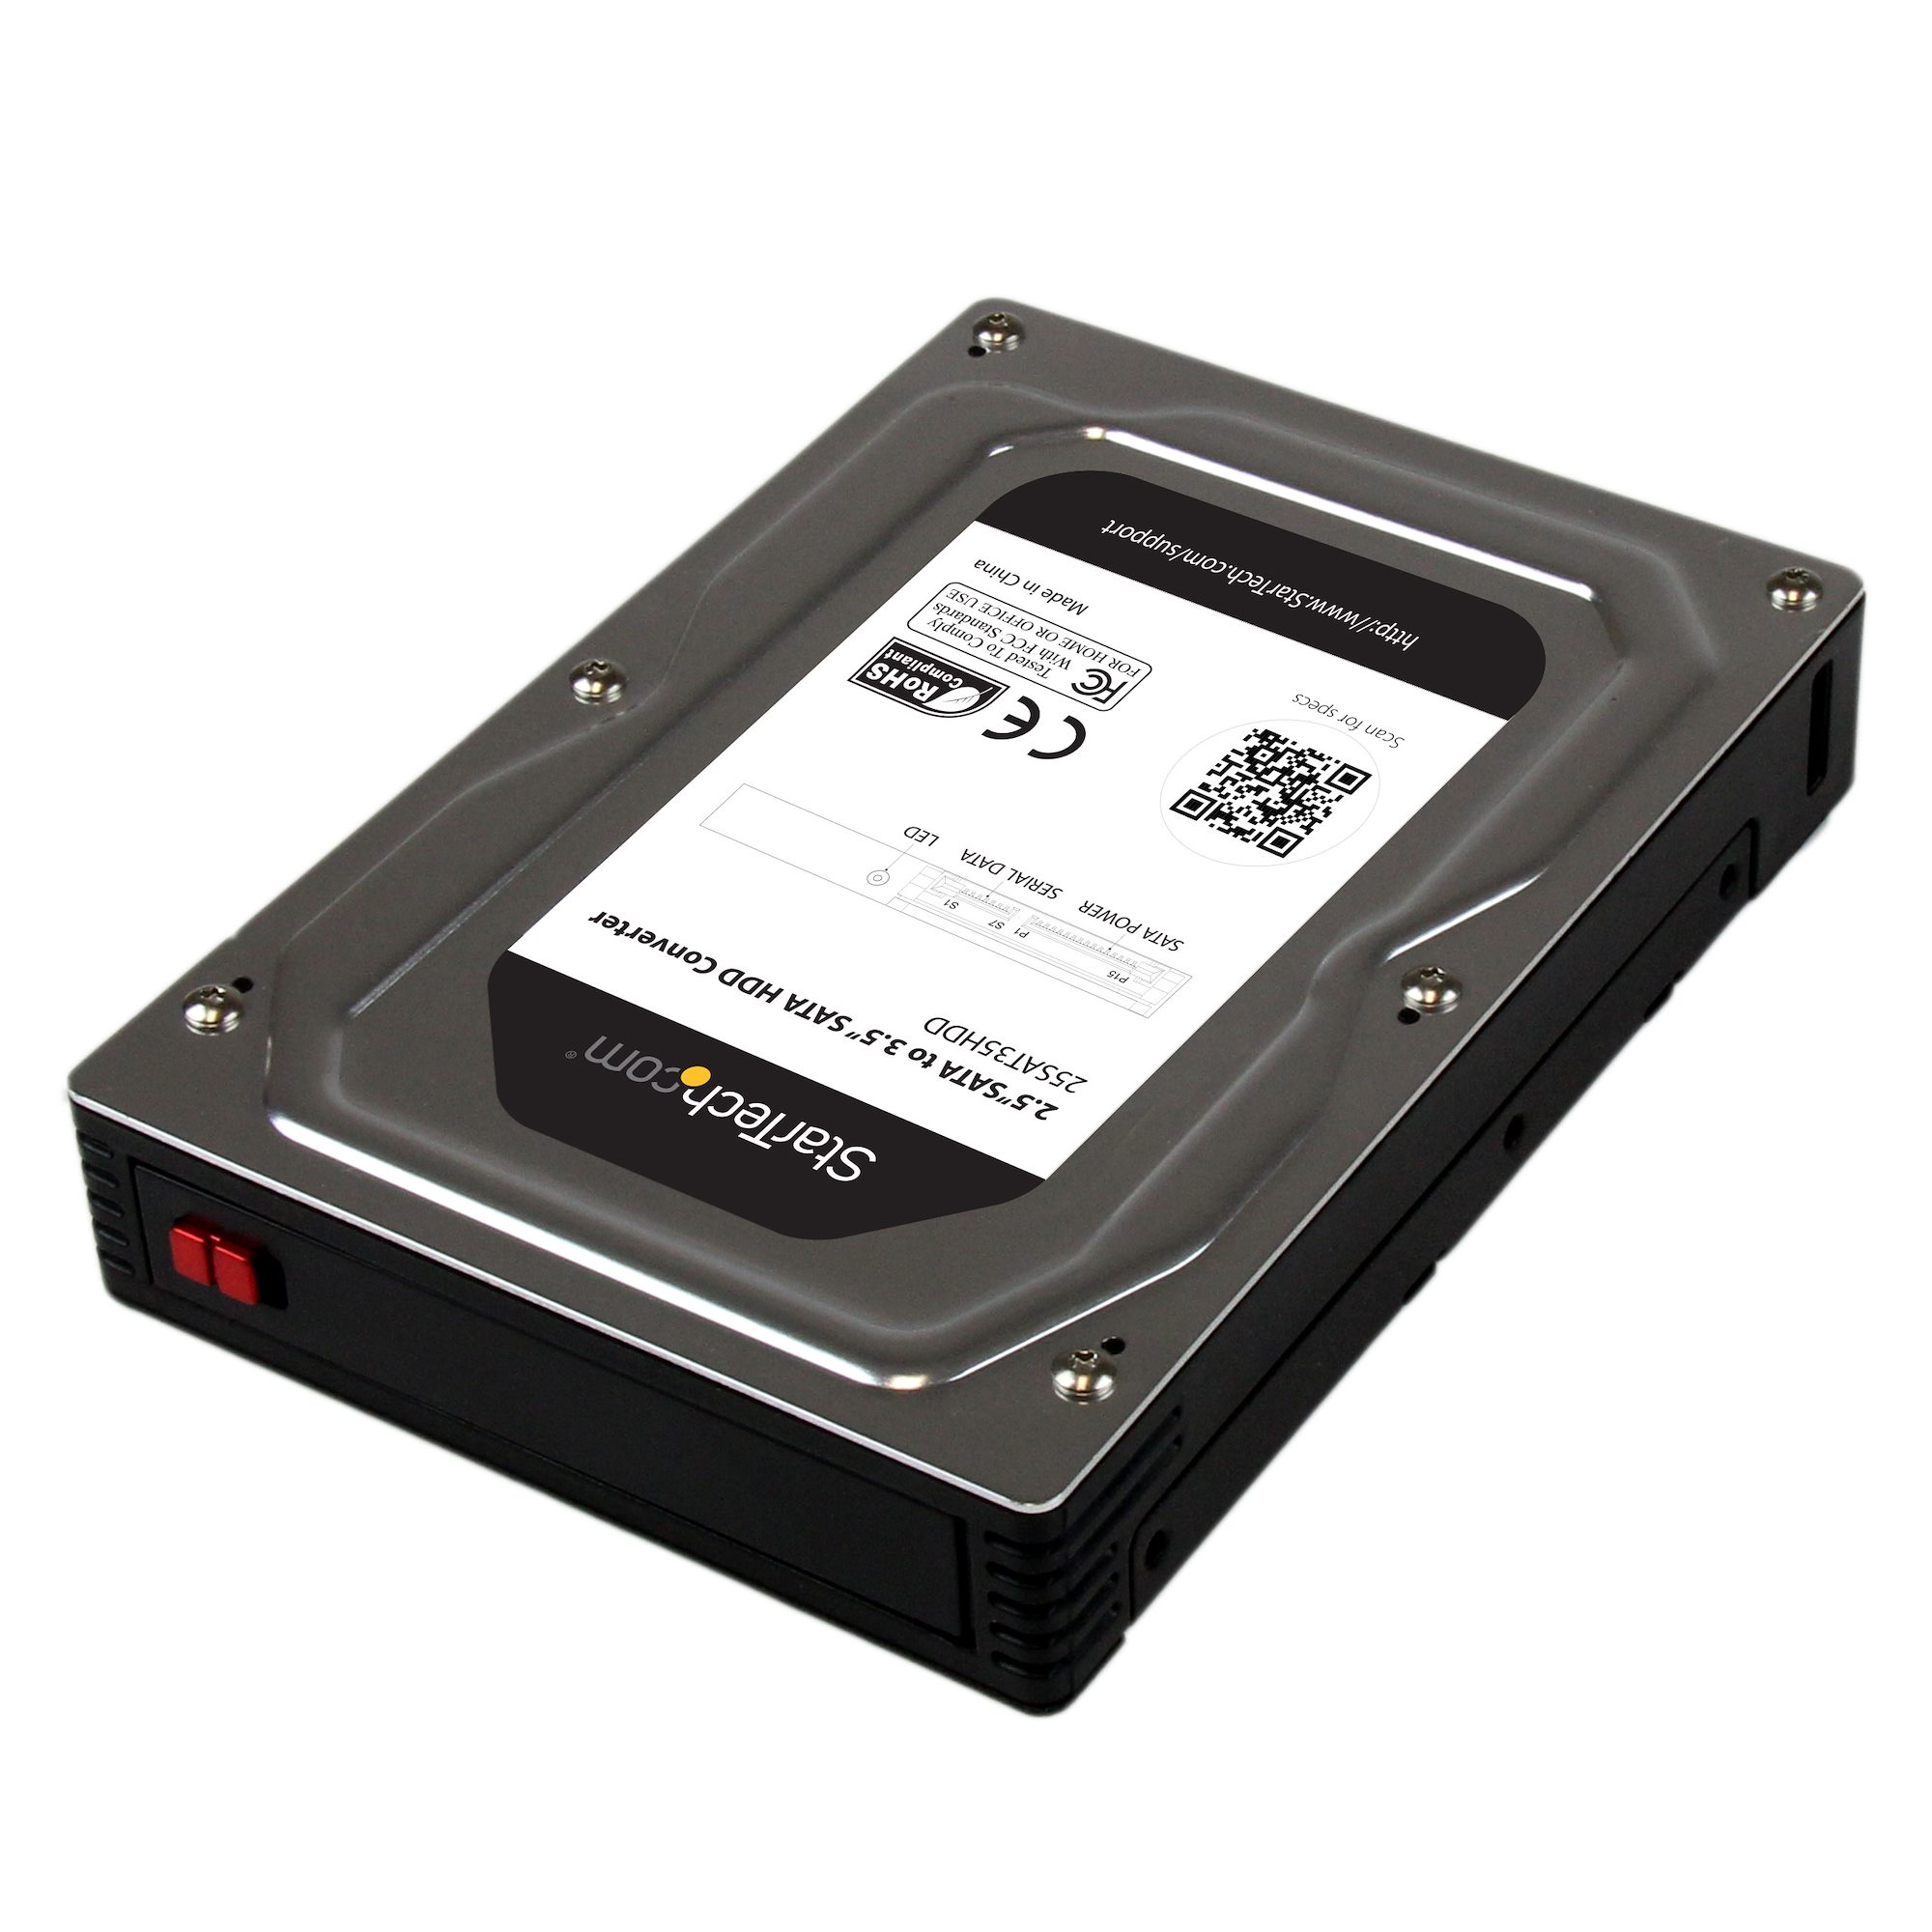 forbundet kølig mode 2.5” to 3.5” SATA HDD Adapter Enclosure - Drive Adapters and Drive  Converters | StarTech.com Europe